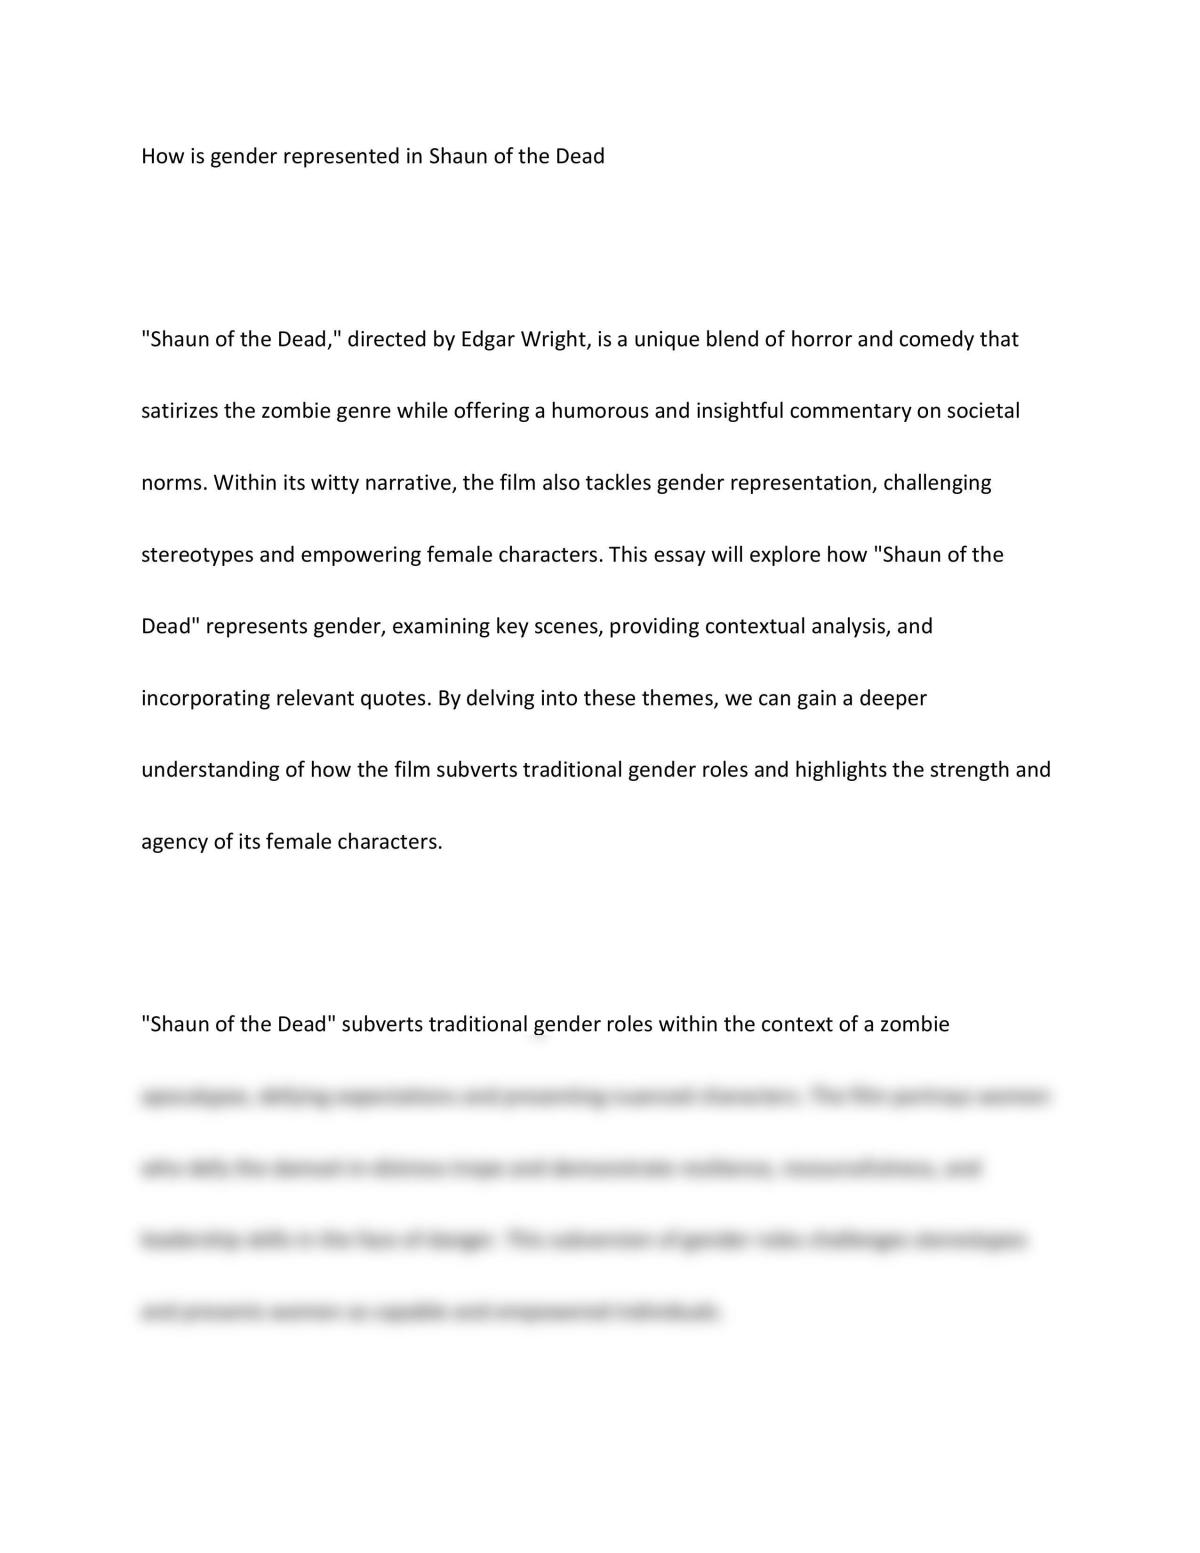 Essay on Gender in Shaun of the Dead - Page 1